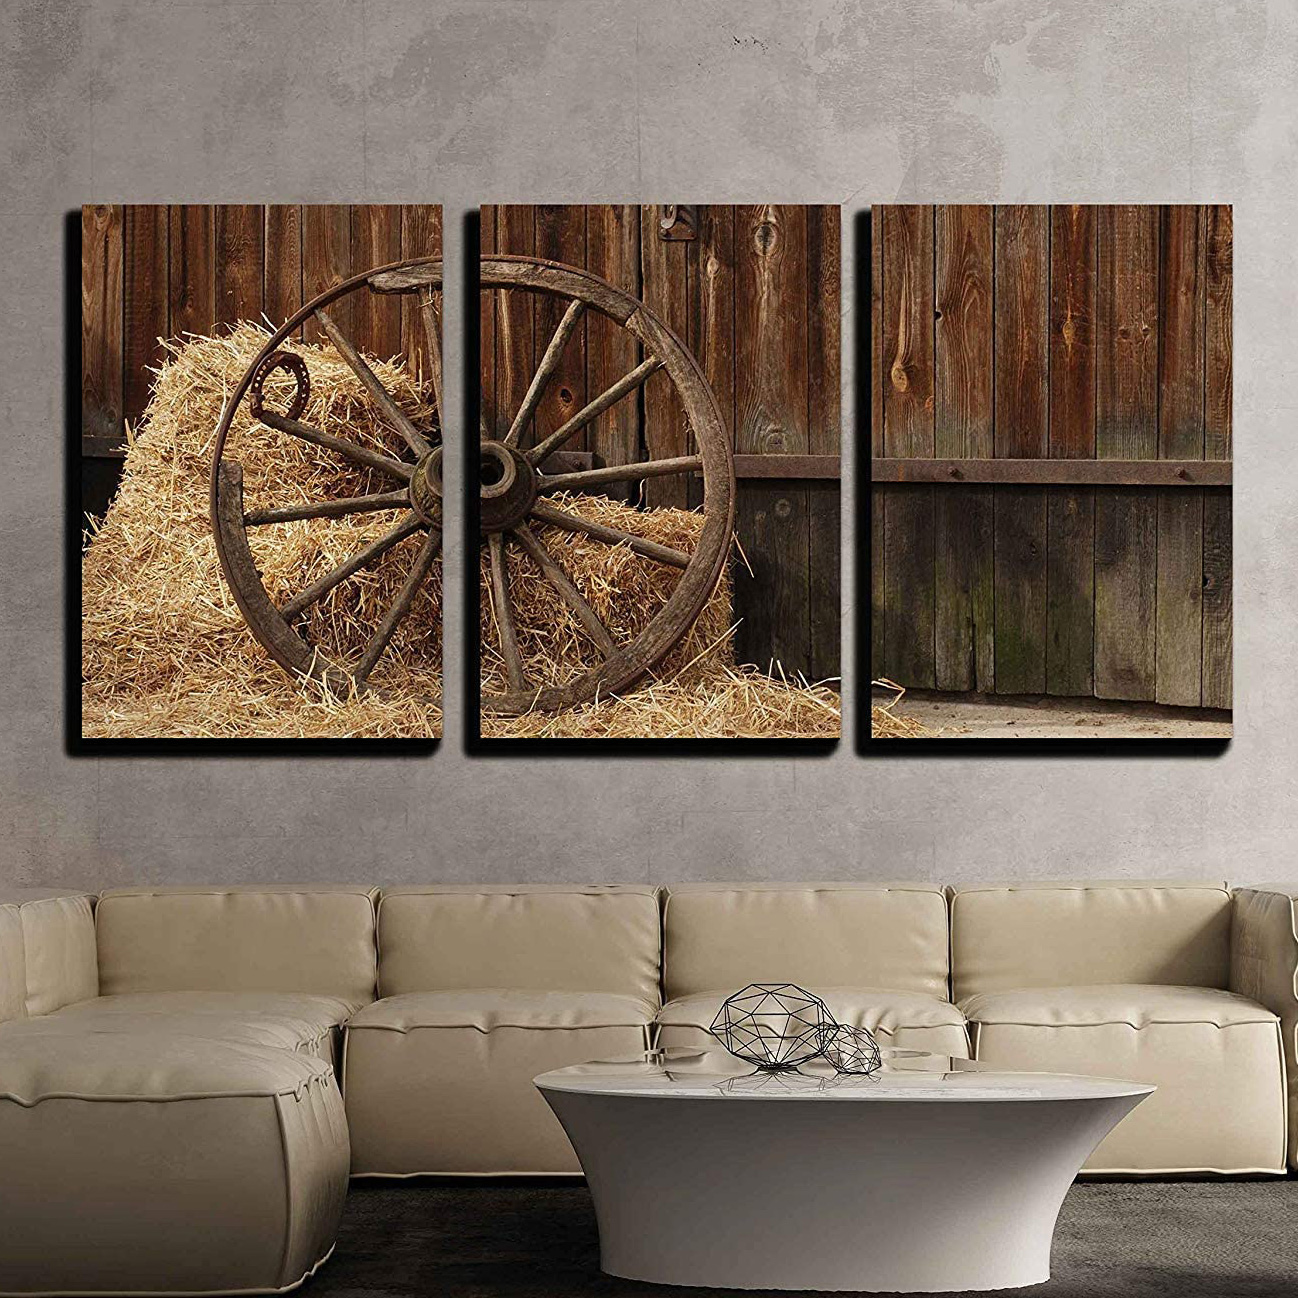 3 Piece Canvas Wall Art - The Old Antique Wheel from cart on Background of hay and barn - Modern Home Art Stretched and Framed Ready to Hang - 16